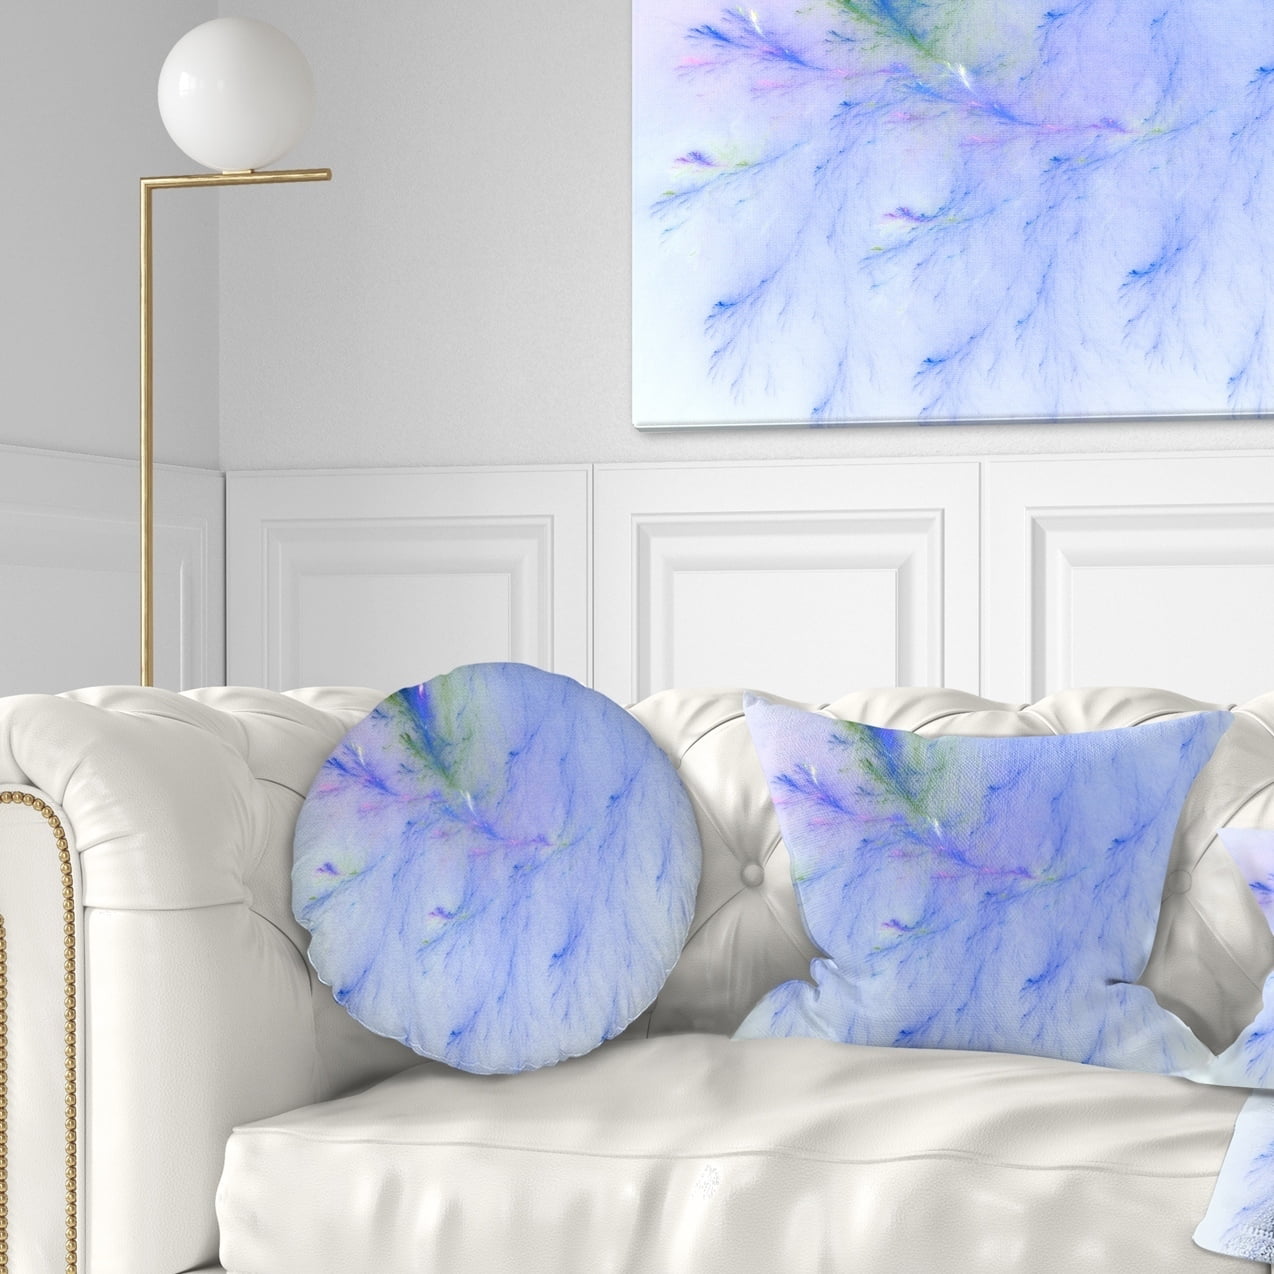 x 26 in in Designart CU16041-26-26 Light Blue Veins of Marble Abstract Cushion Cover for Living Room Sofa Throw Pillow 26 in